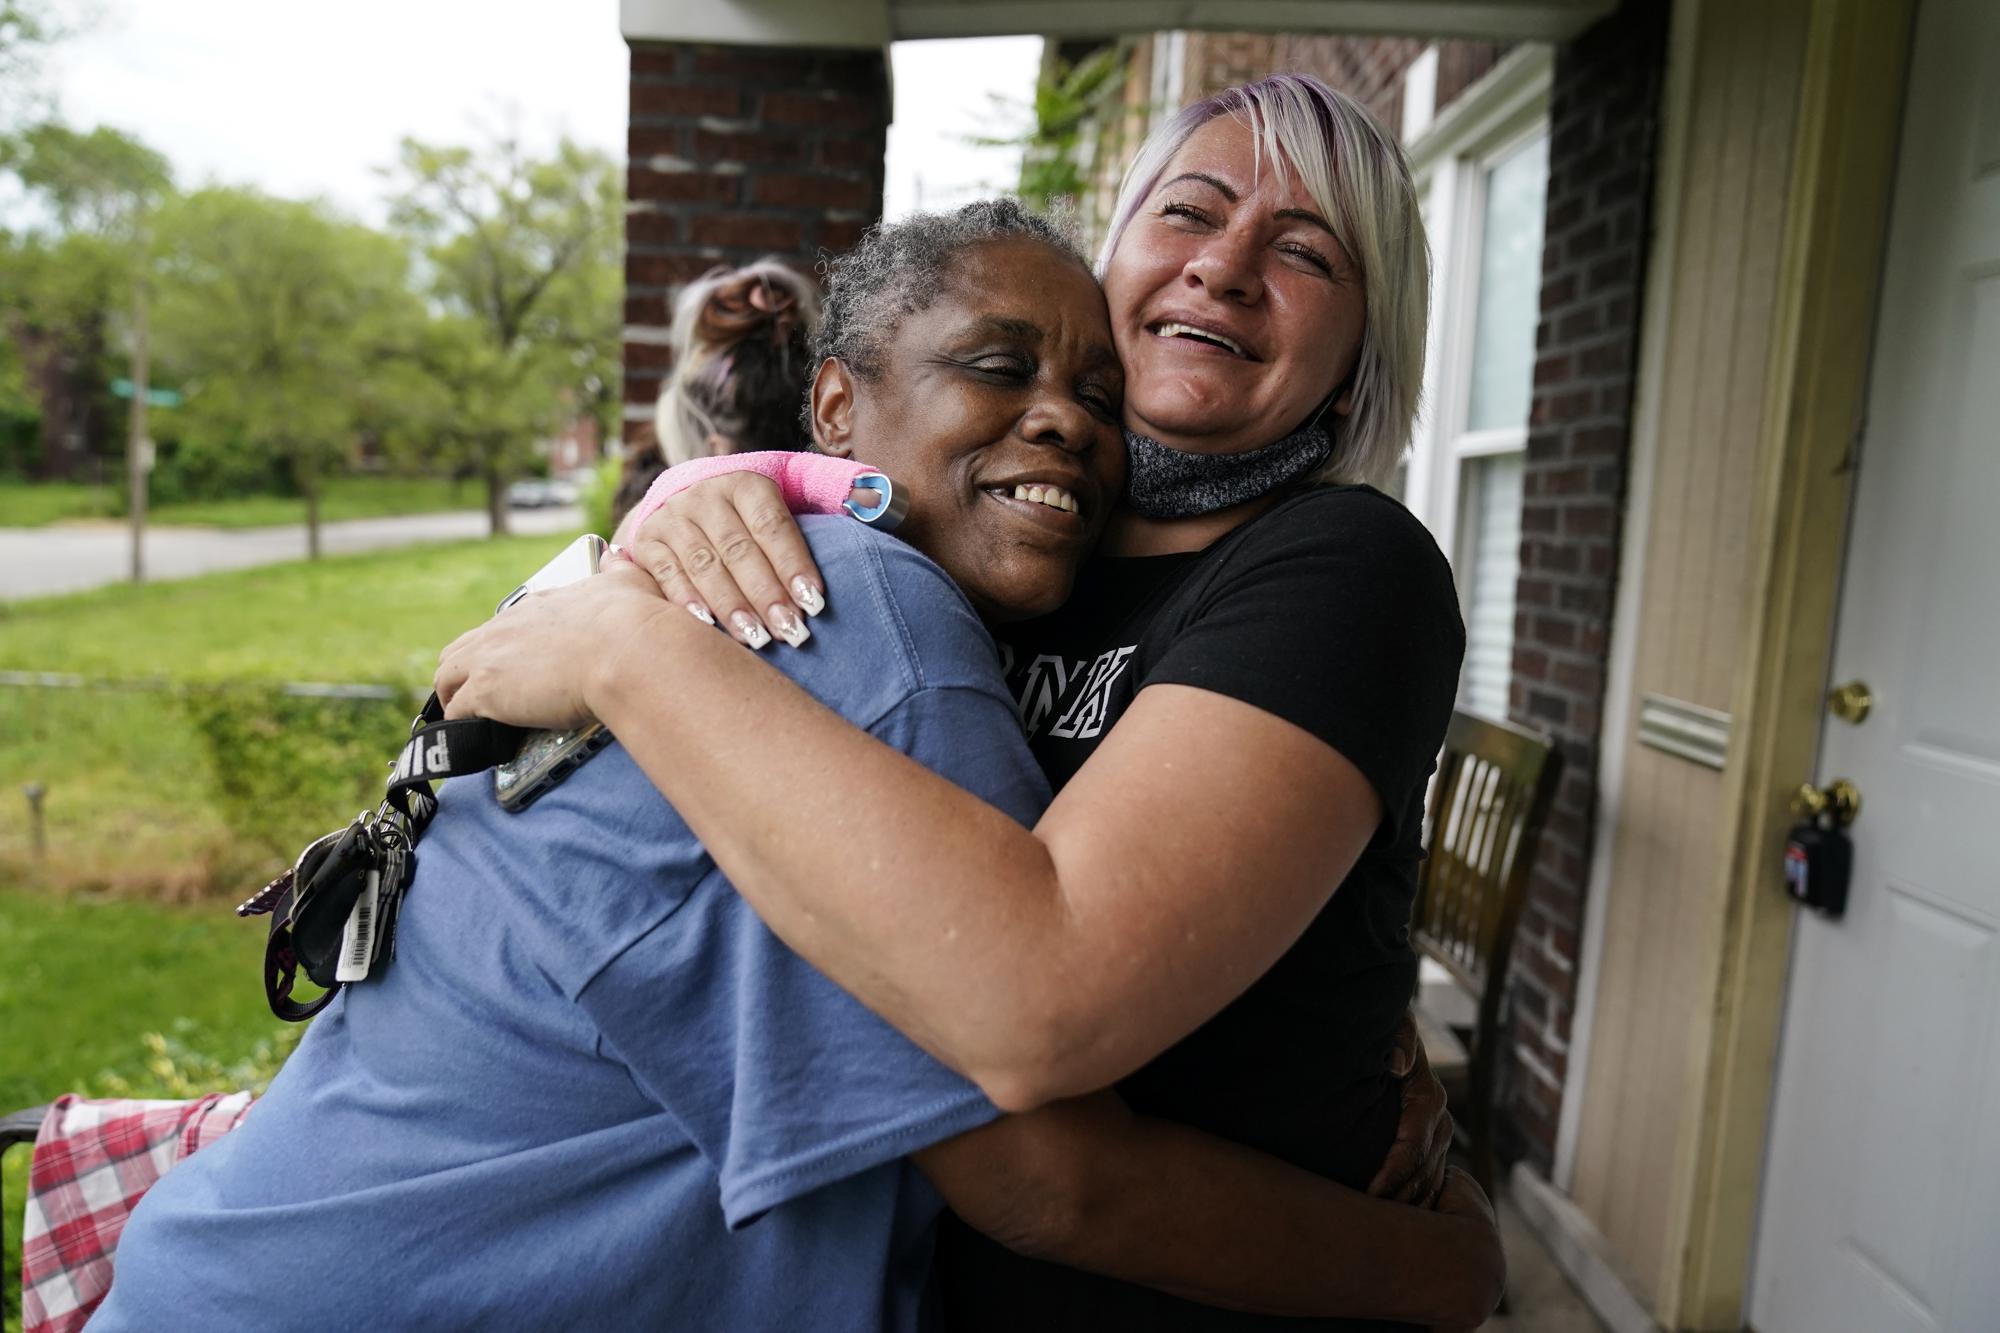 Lynda Brooks, left, hugs Amy Ford in St. Louis on Wednesday, May 19, 2021. Brooks has been in recovery now for several months, and she prays for God to remain scared of the drugs. She got a job and an apartment, and proudly keeps her new keys dangling from a shoelace around her neck. Her family told her they are proud of her. She said that feels like heaven. (AP Photo/Brynn Anderson)